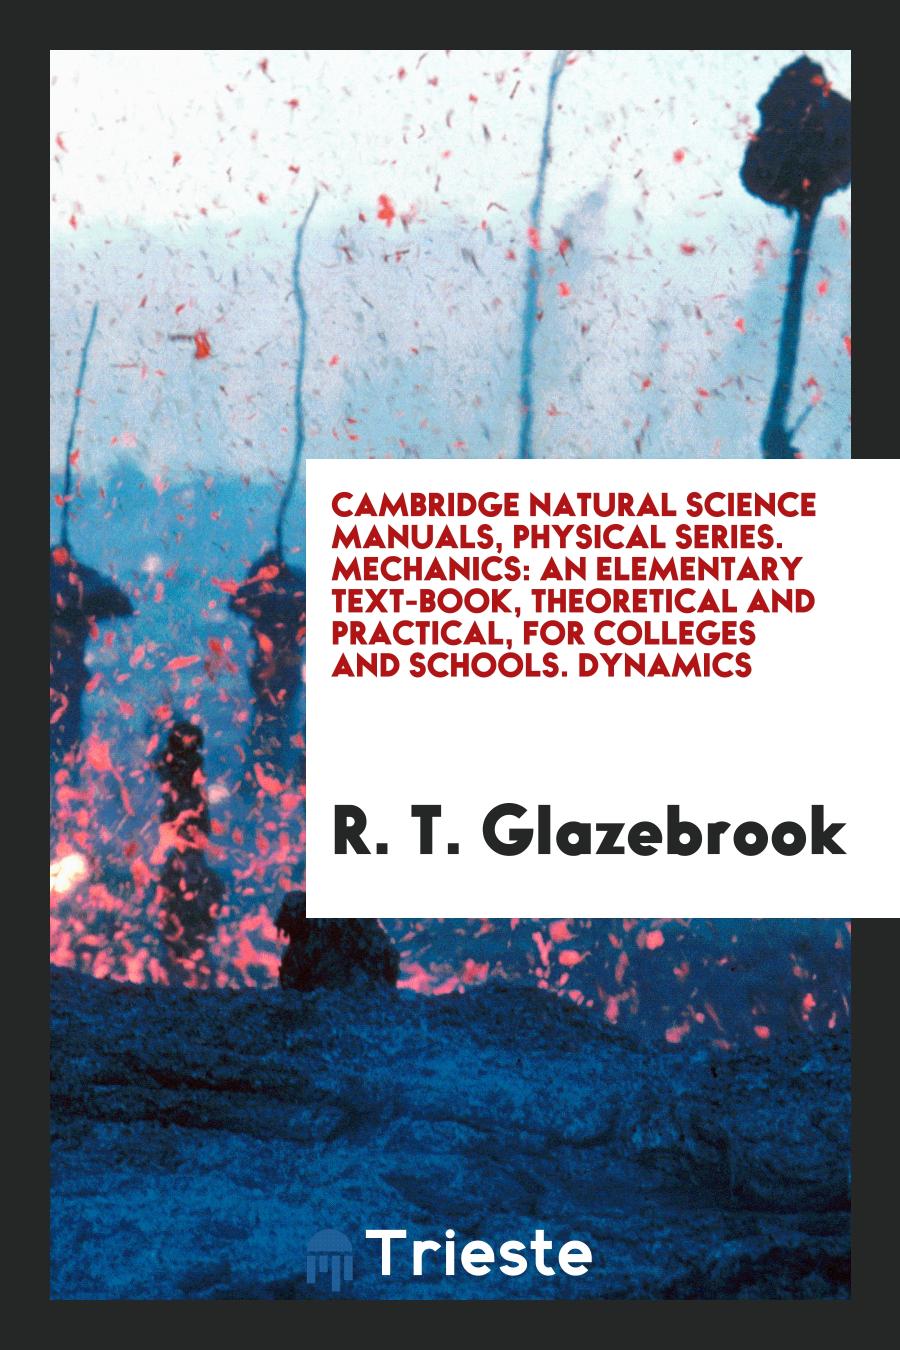 Cambridge Natural Science Manuals, Physical Series. Mechanics: An Elementary Text-Book, Theoretical and Practical, for Colleges and Schools. Dynamics